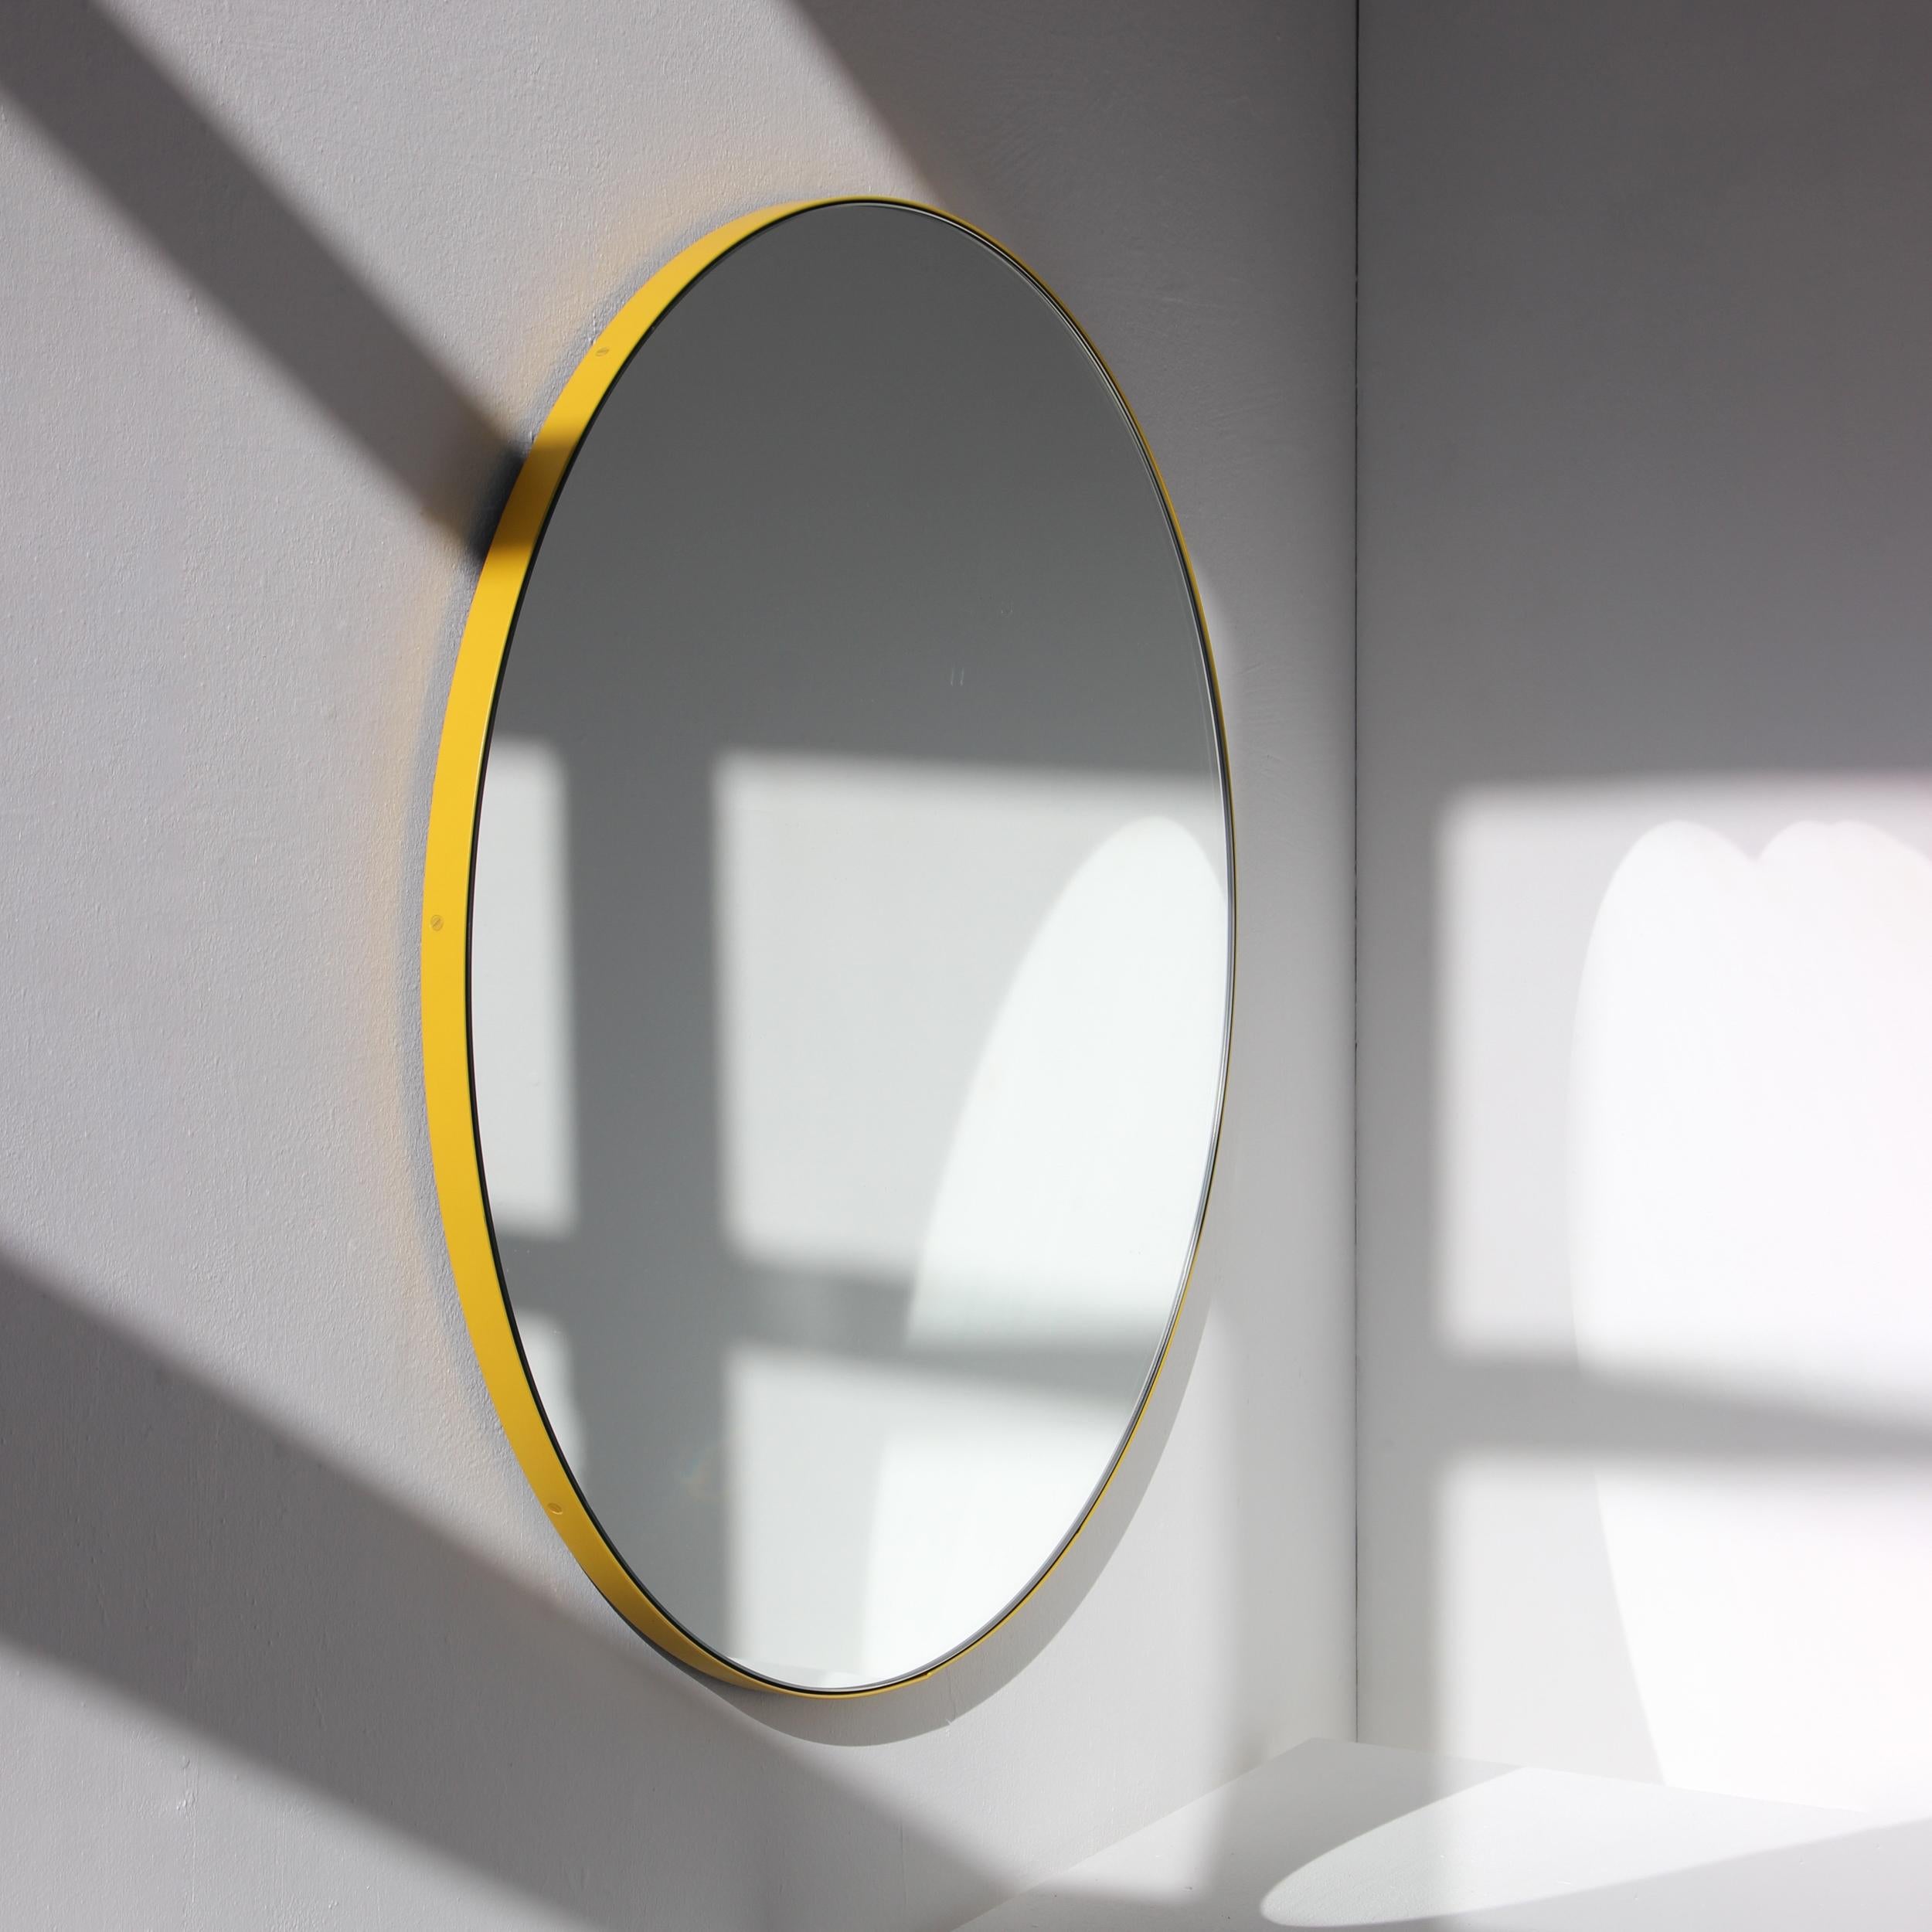 Modern round mirror with a vibrant yellow powder coated aluminium frame. Designed and handcrafted in London, UK.

Medium, large and extra-large mirrors (60, 80 and 100cm) are fitted with an ingenious French cleat (split batten) system so they may